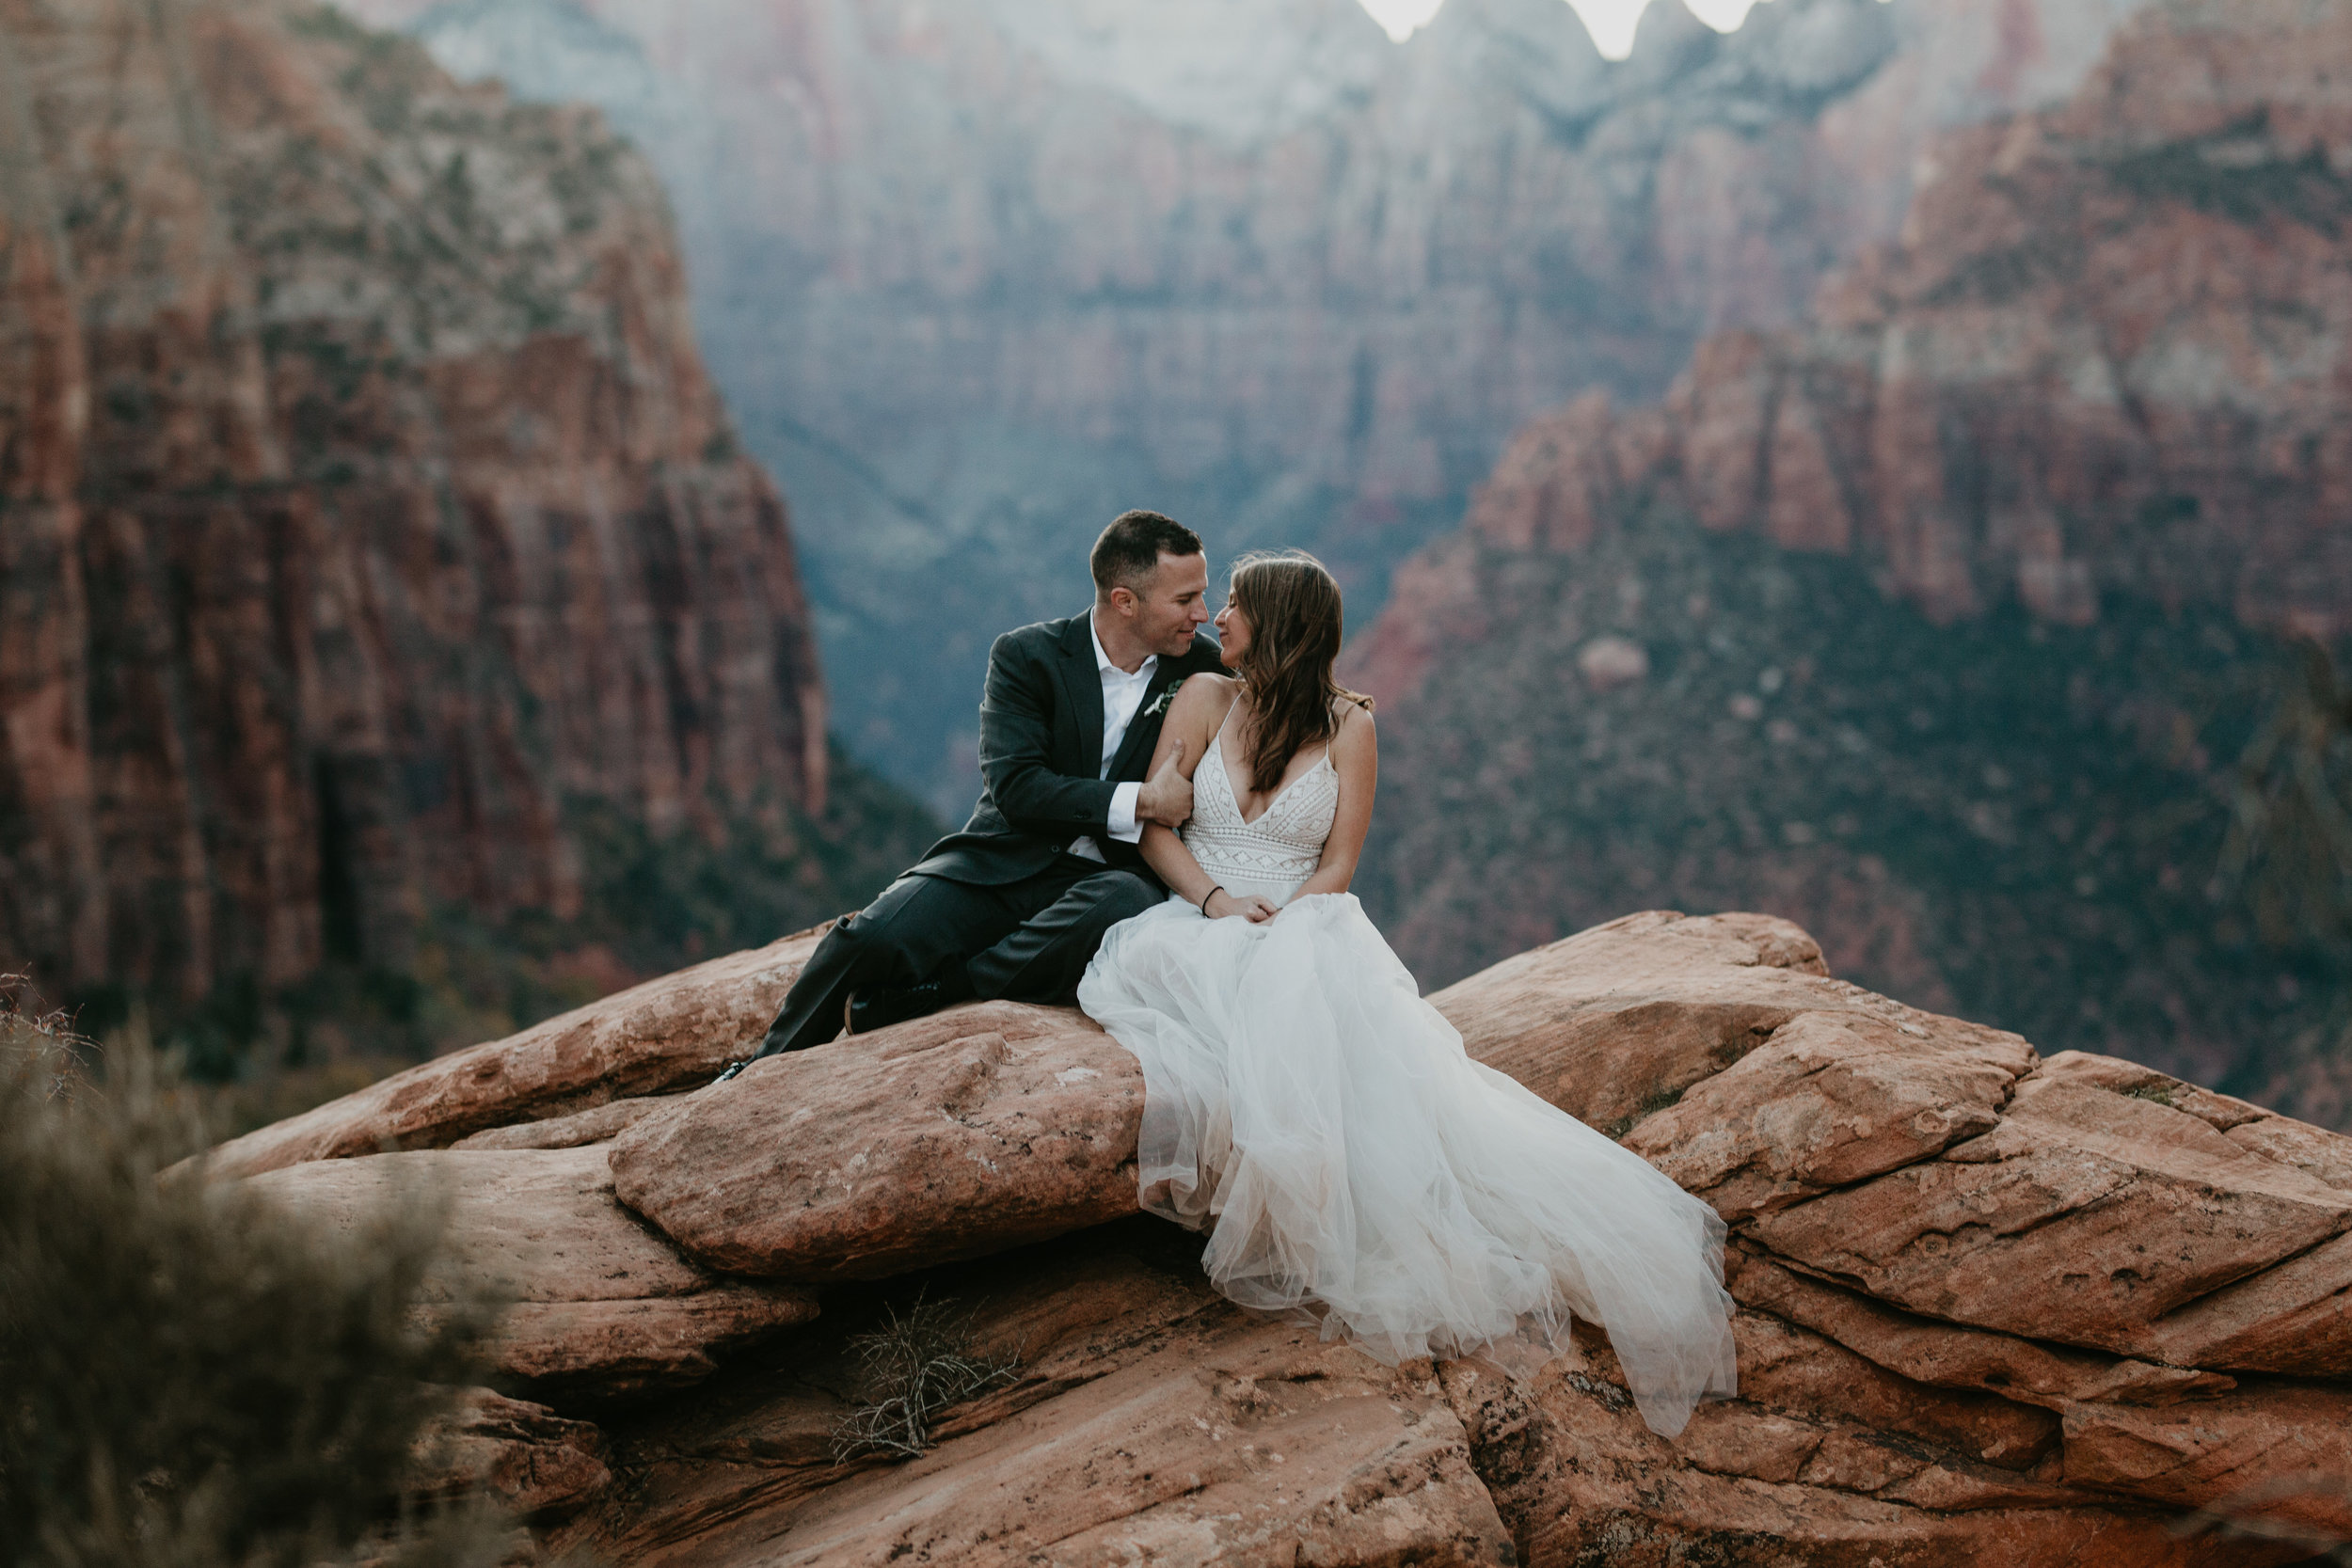 nicole-daacke-photography-zion-national-park-elopement-photographer-canyon-overlook-trail-elope-hiking-adventure-wedding-photos-fall-utah-red-rock-canyon-stgeorge-eloping-photographer-89.jpg